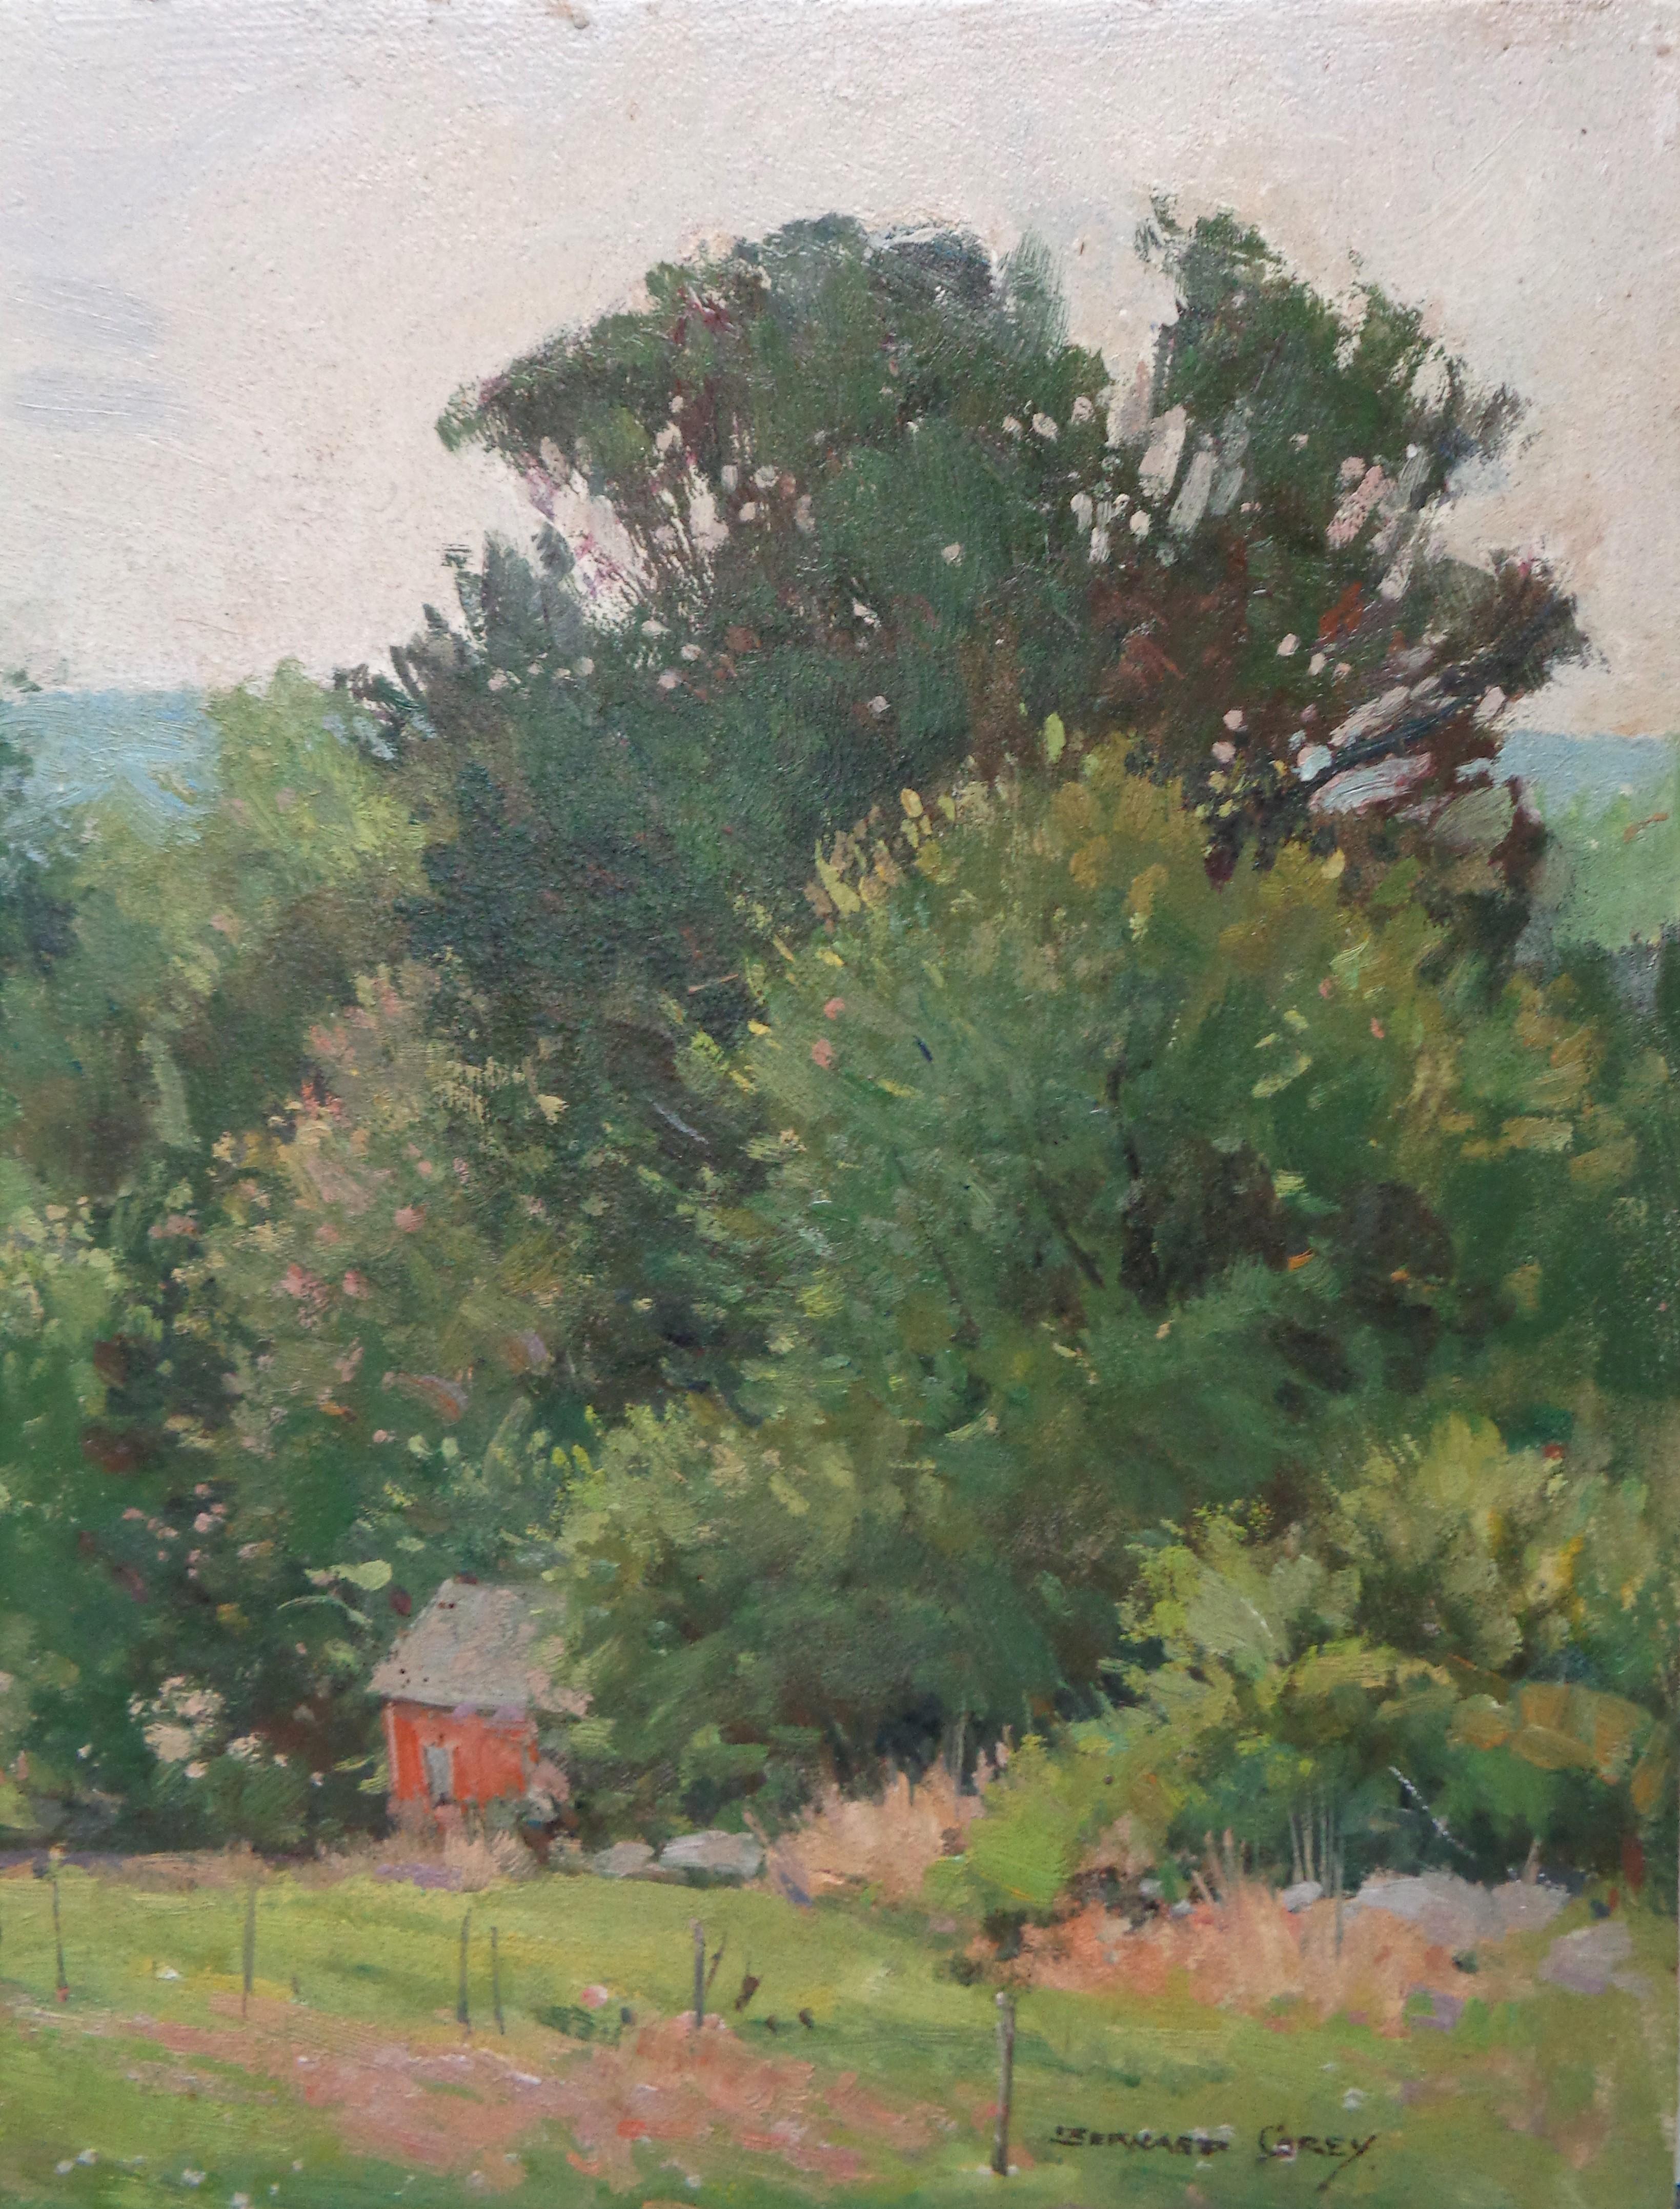 This painting
Spring/Summer Landscape
oil/ panel,  image is 10 1/8 x 13 7/8 unframed, could benefit from a cleaning. In as untouched purchased condition. Signed LR.
Bernard Corey (1914-2000)
Bernard Corey is one of New England's most beloved